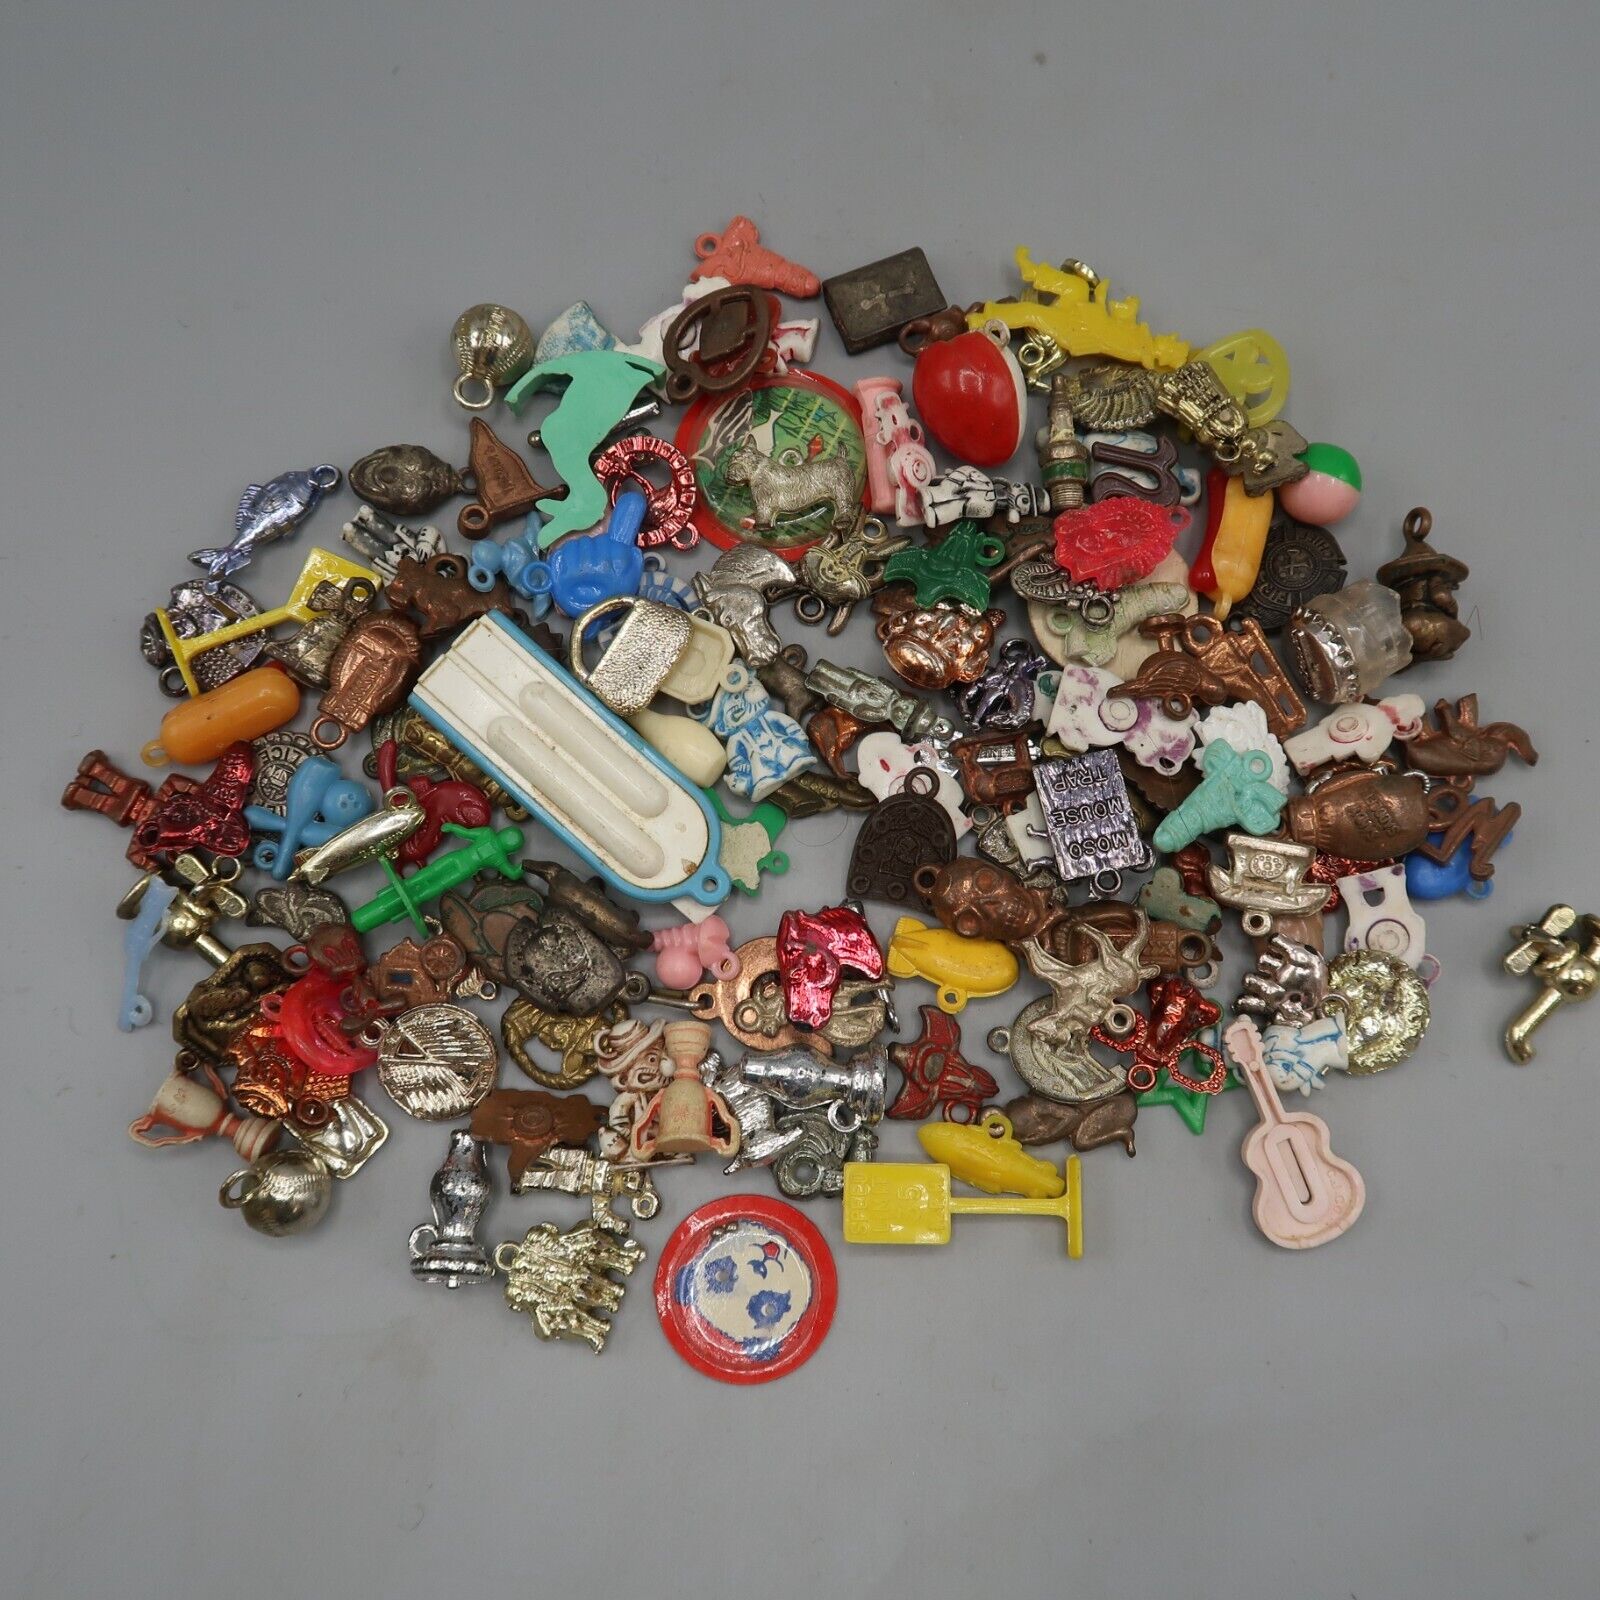 Vintage Cracker Jack Prize Charms Celluloid Plastic Toy Animals Huge Mixed Lot